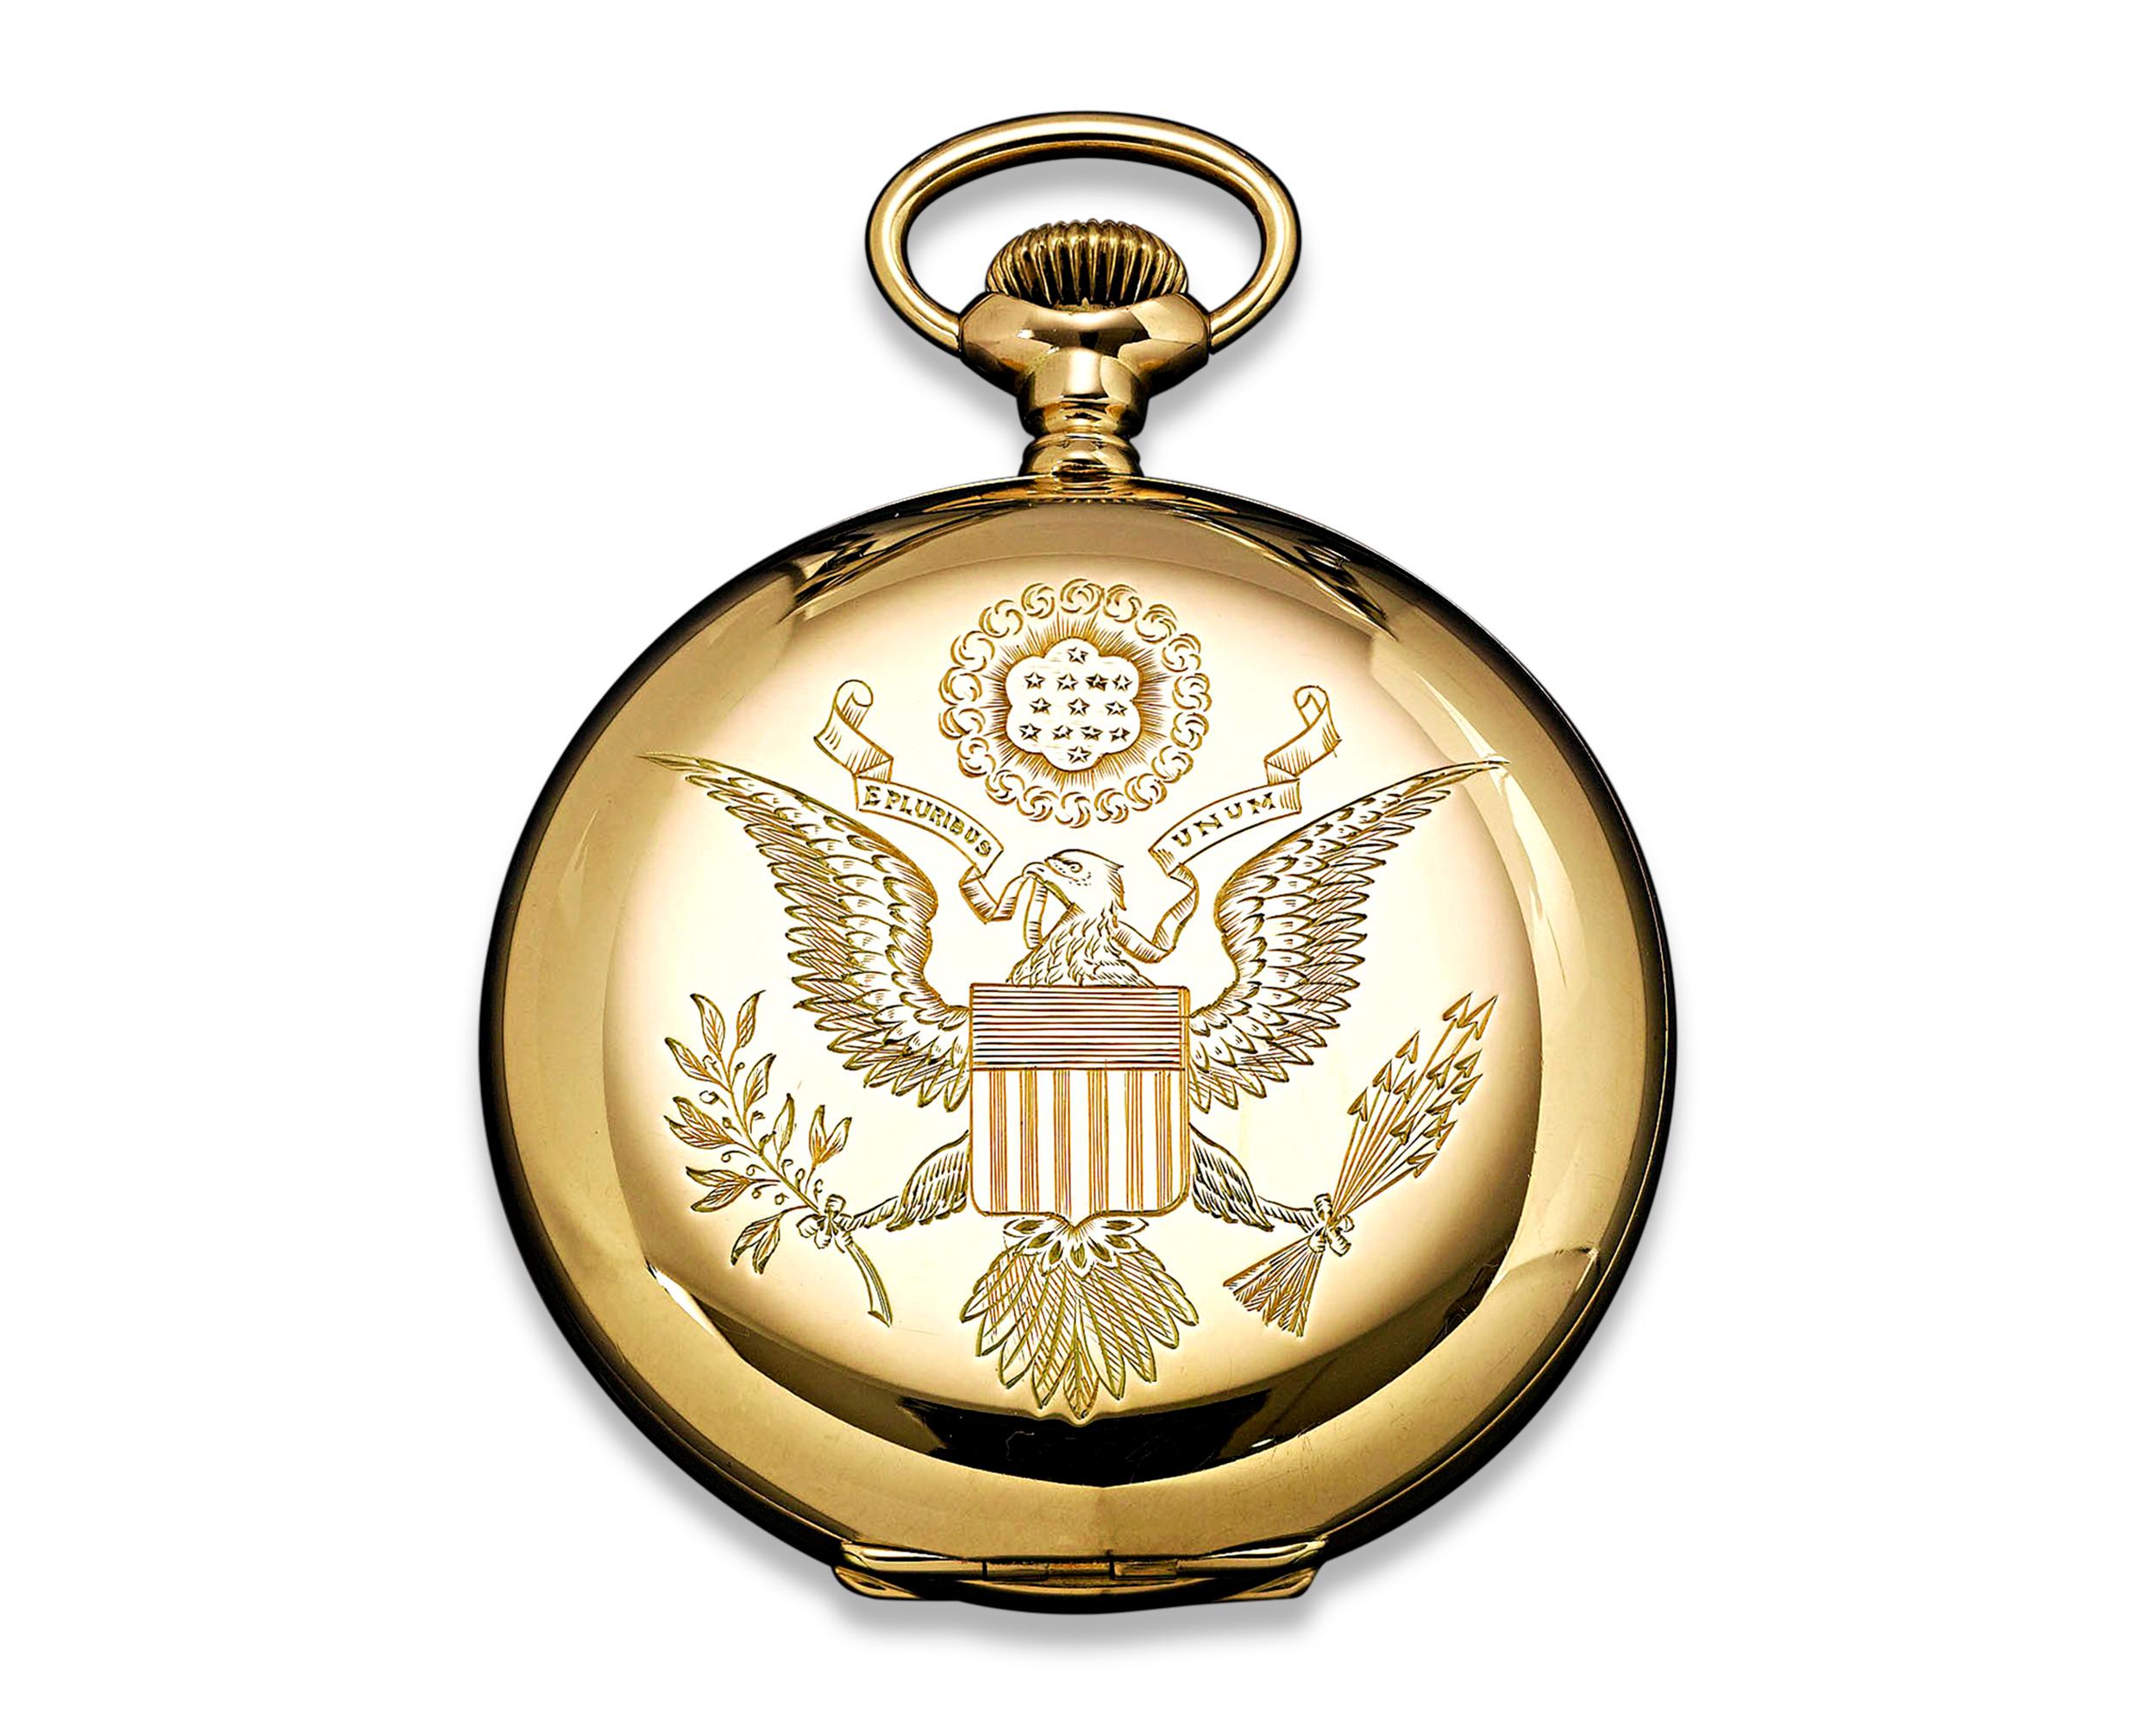 This rare and highly significant full Hunter Waltham pocket watch was presented by President of the United States Woodrow Wilson to Henry William Webster, the Captain of the British tugboat Champion, in 1919. As part of a presidential tradition